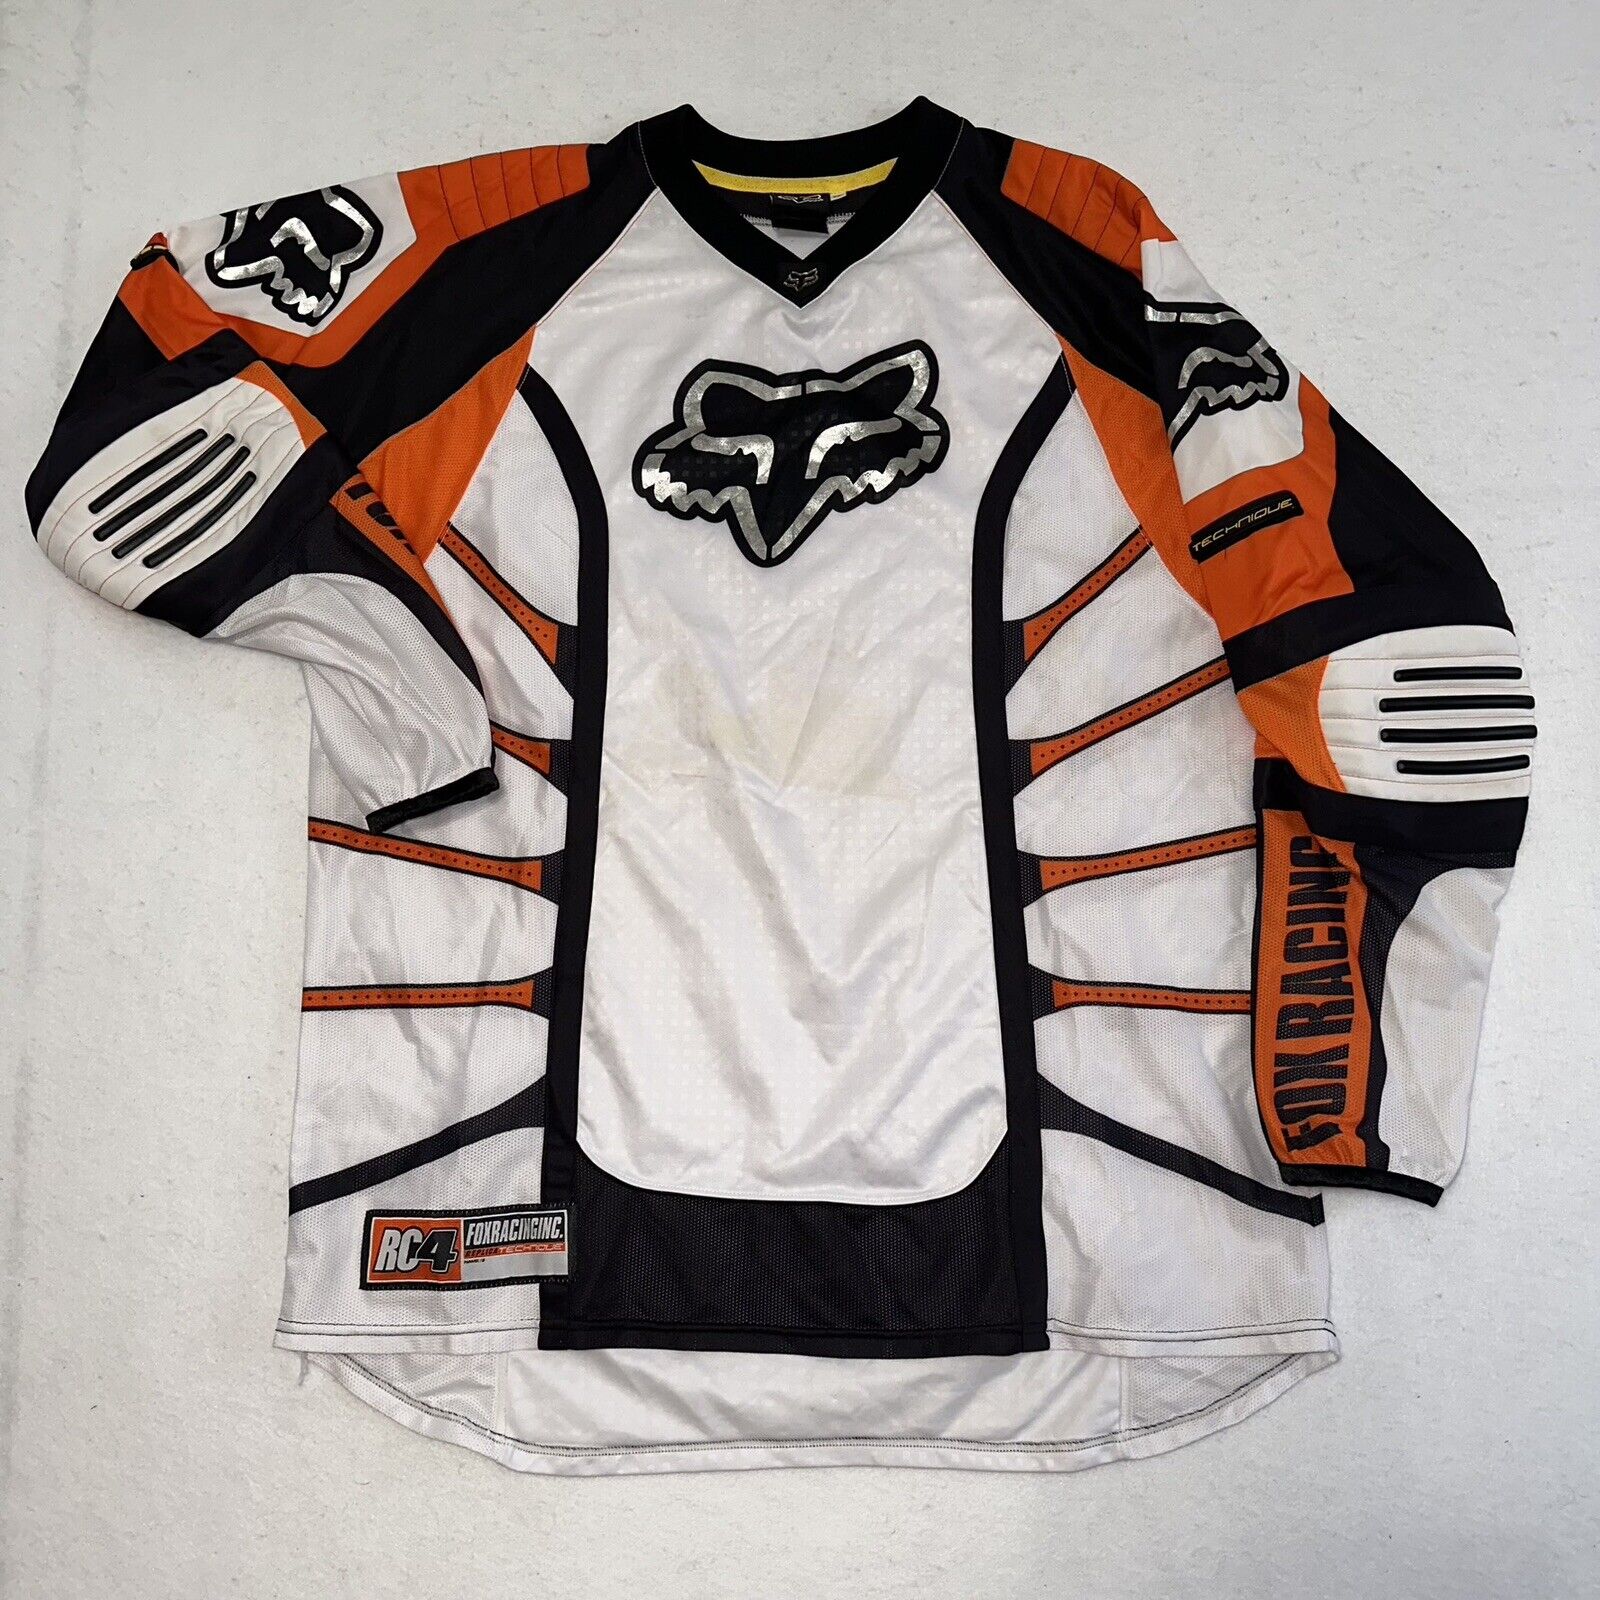 Ricky Carmichael Limited￼ Edition RC4 Fox Racing Motocross Jersey Technique XL